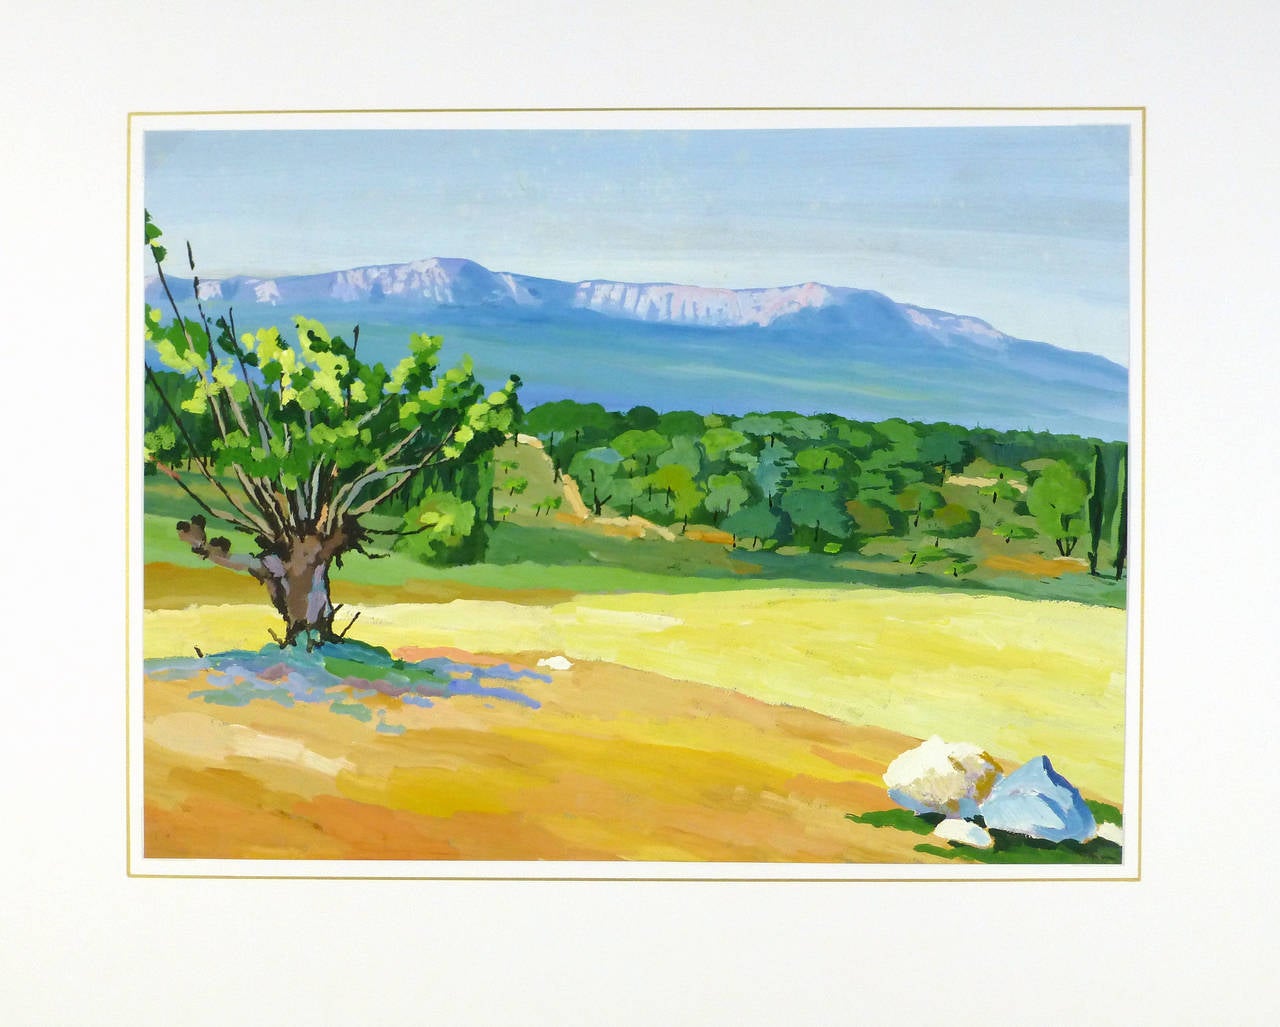 Soothing gouache painting of a panoramic view of the landscape of Les Baux de Provence, France by A. Poirier, 1955. Unsigned.

Original one-of-a-kind artwork on paper displayed on a white mat with a gold border. Mat fits a standard-size frame.